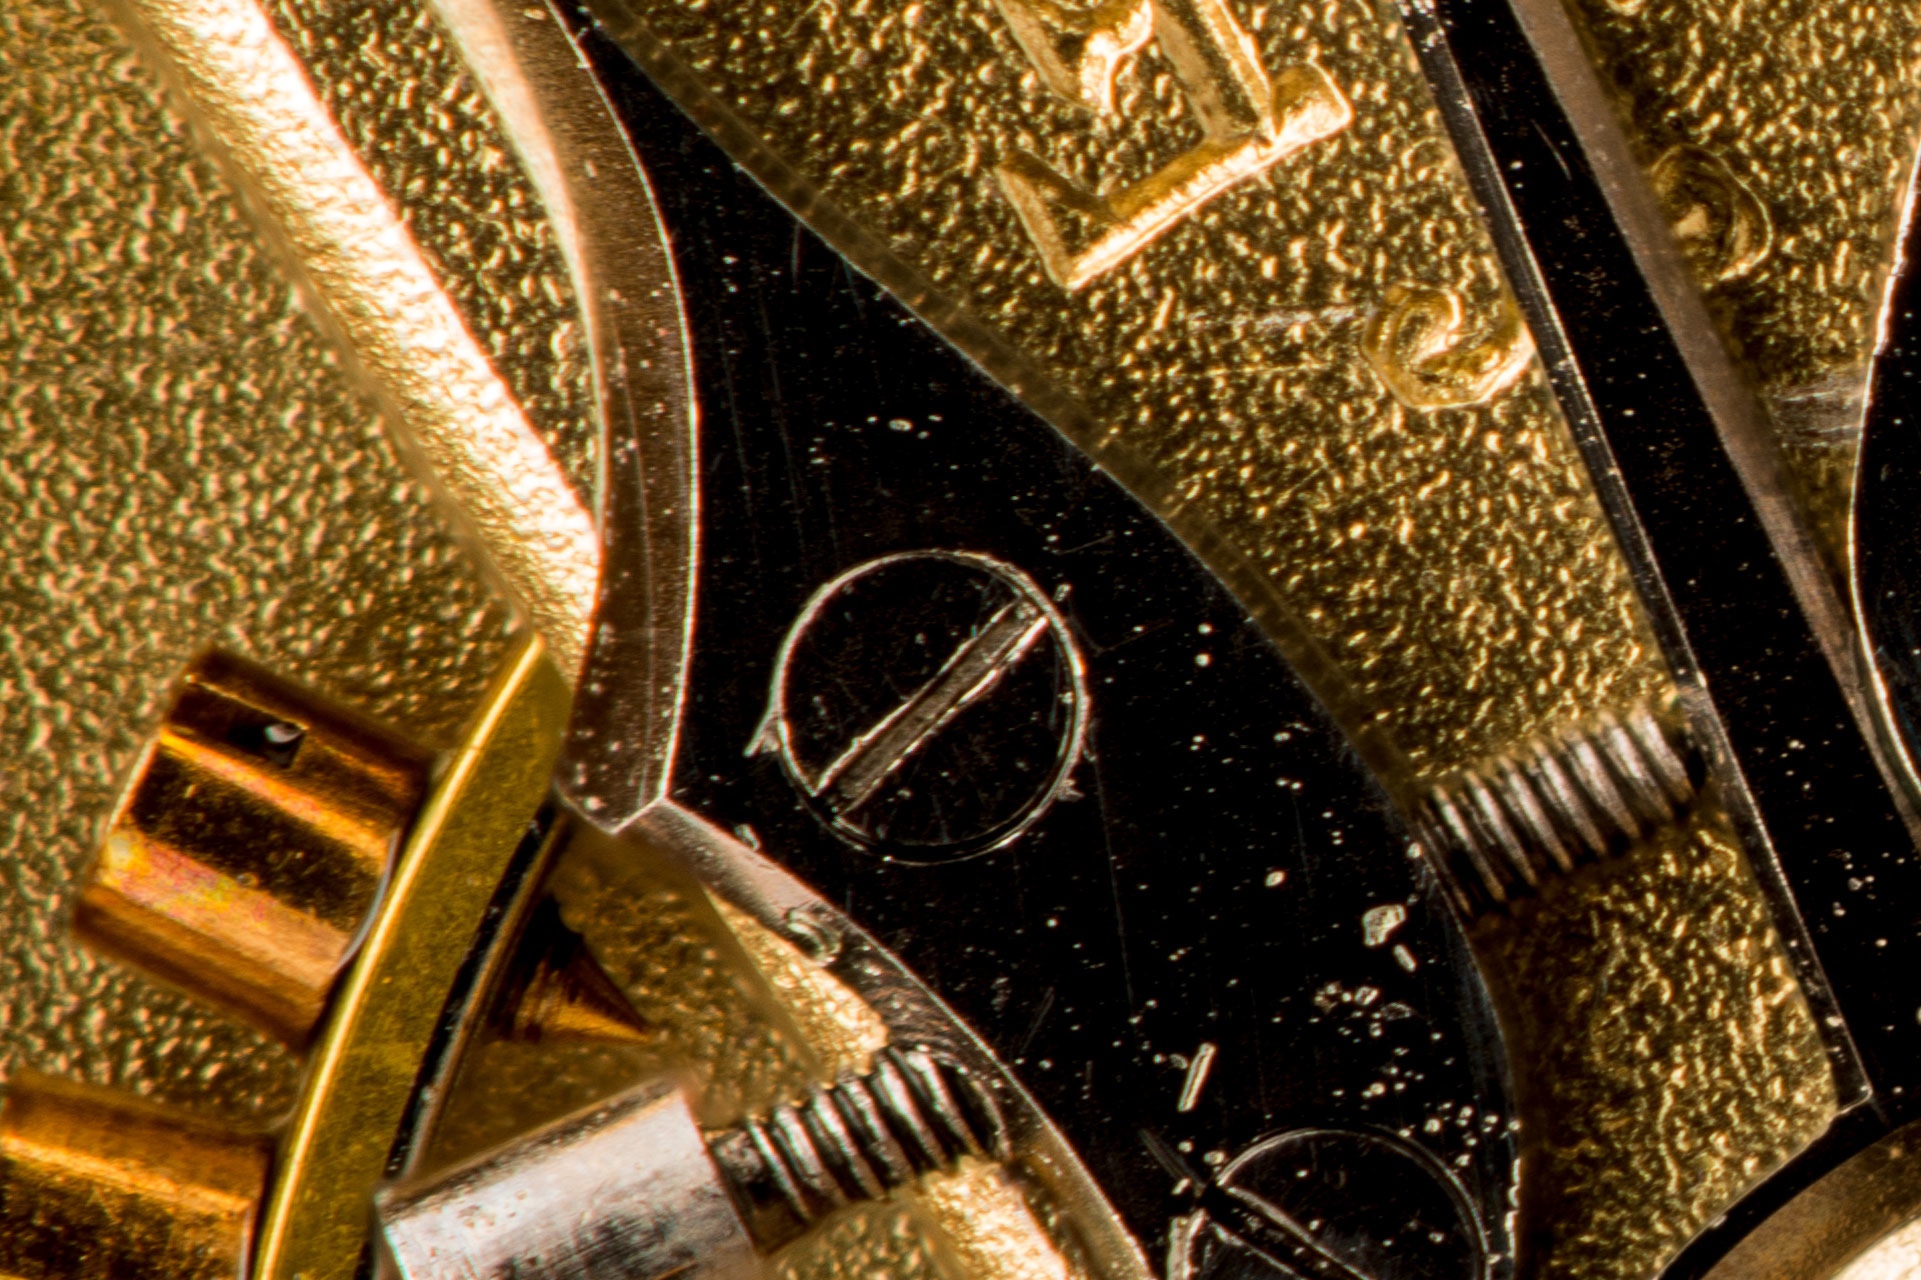 Focus Stacking using 10 frames. 1905 Stauffer & Co. Peerless Fob Watch, 18k gold with Swiss made IWC Calibre No.52 movement.